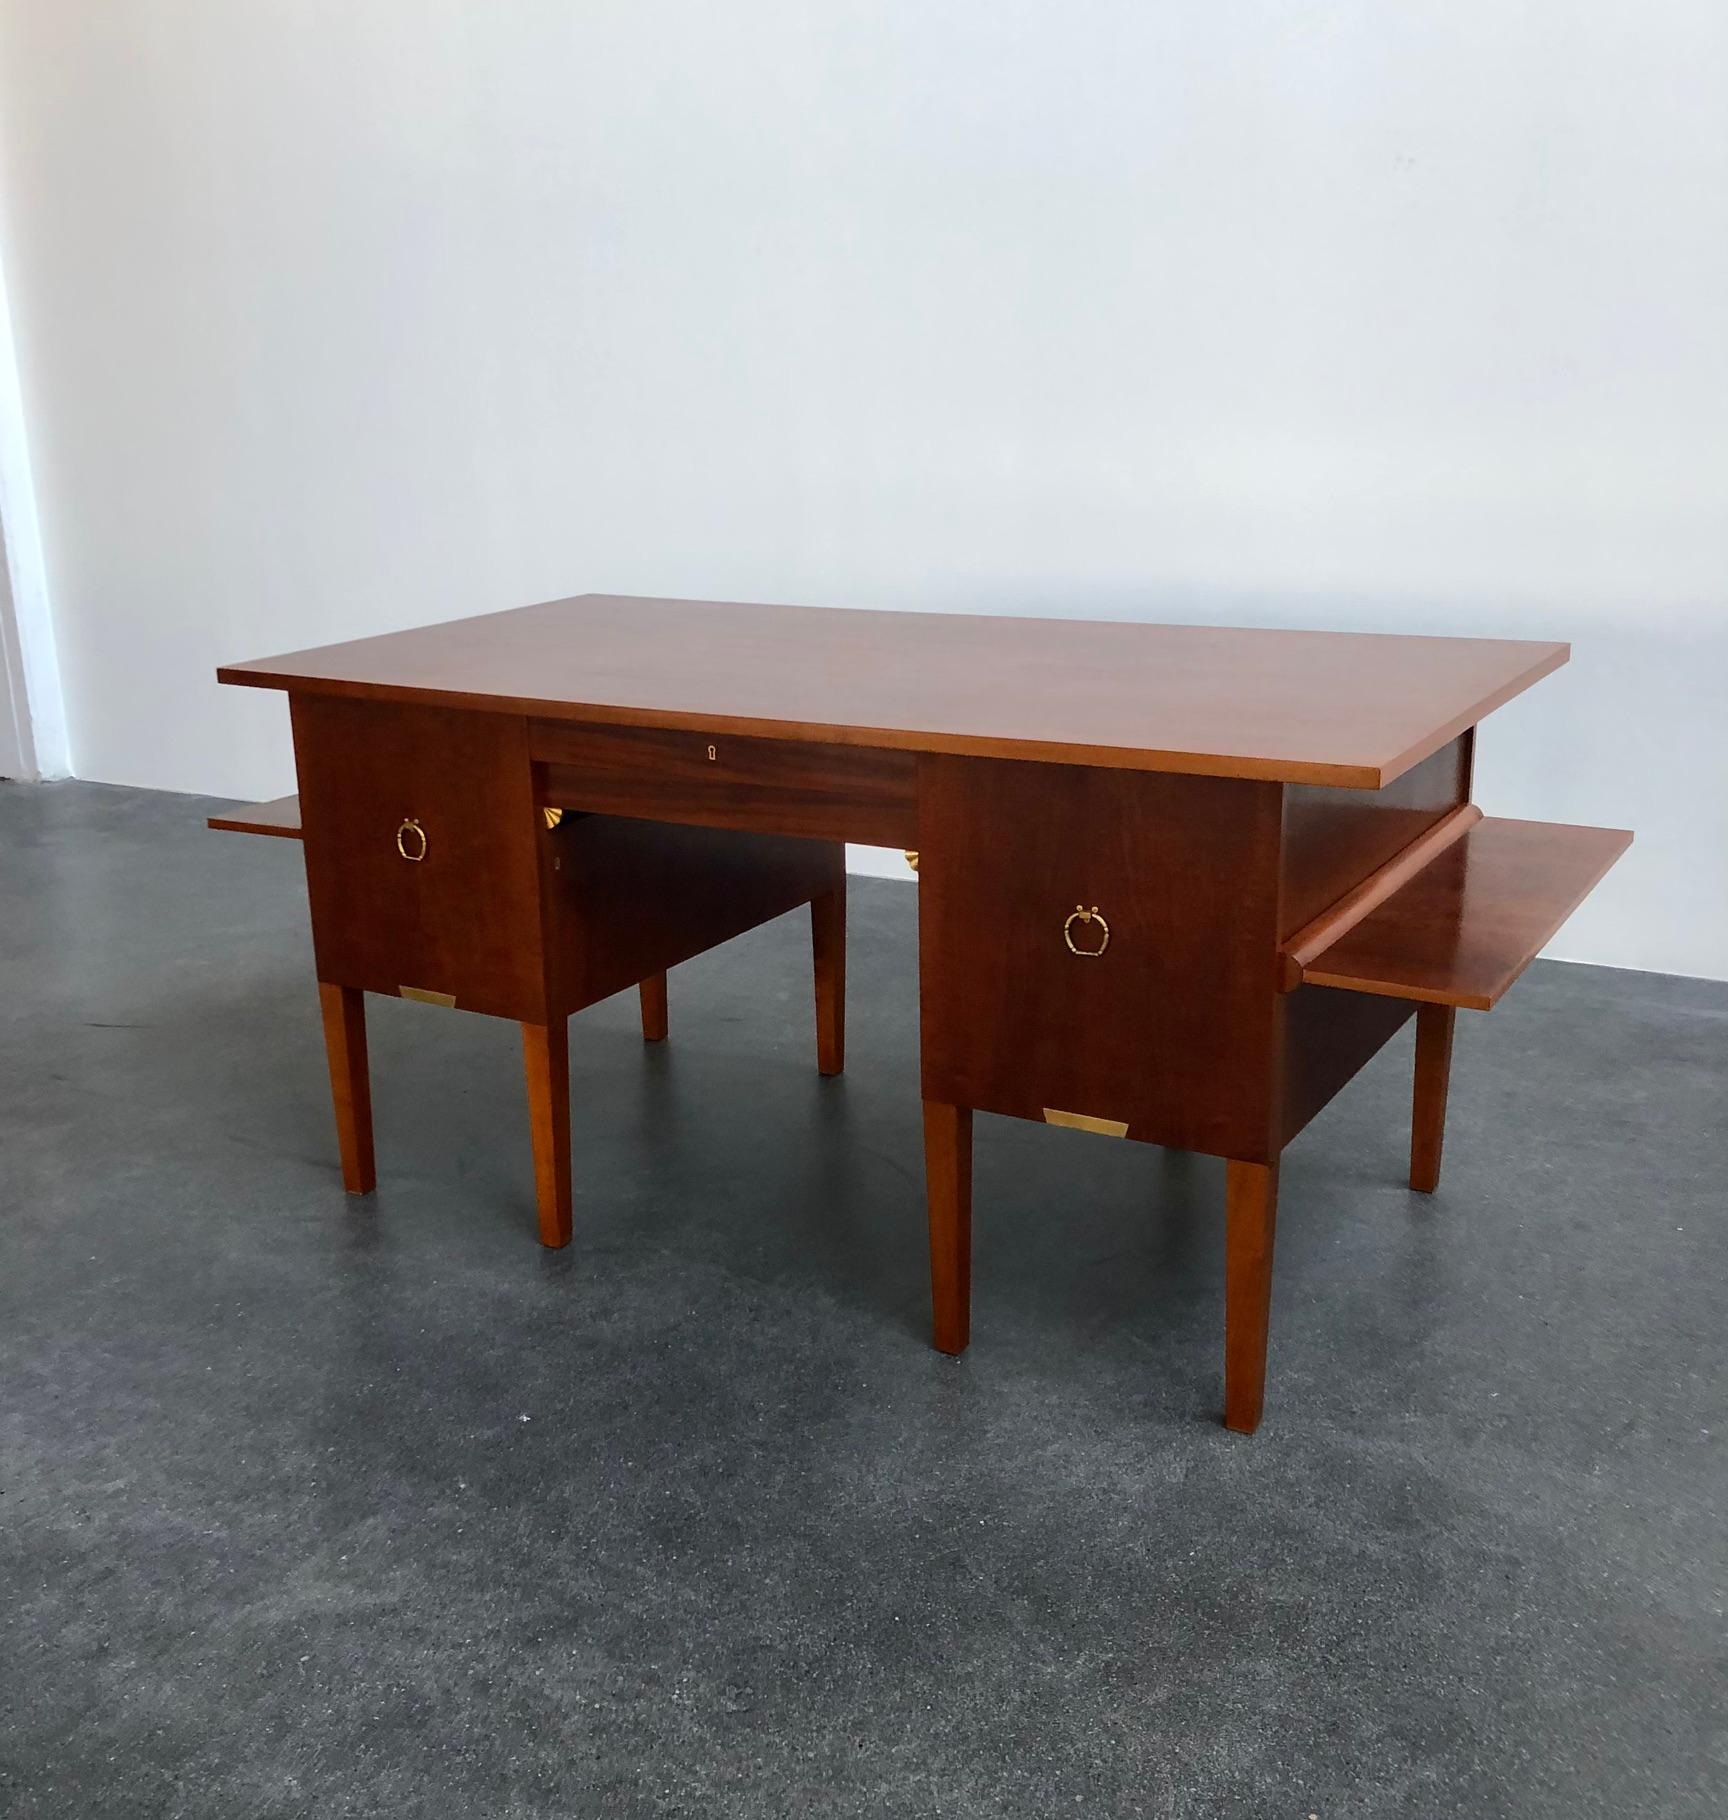 Johan Rohde desk in mahogany with brass fittings. Right side have three drawers and left has three shelfs when doors open.

Provenance: This desk was made for H. P. Rohde in 1945, who was the son of Johan Rohde. Comes with the original water colour